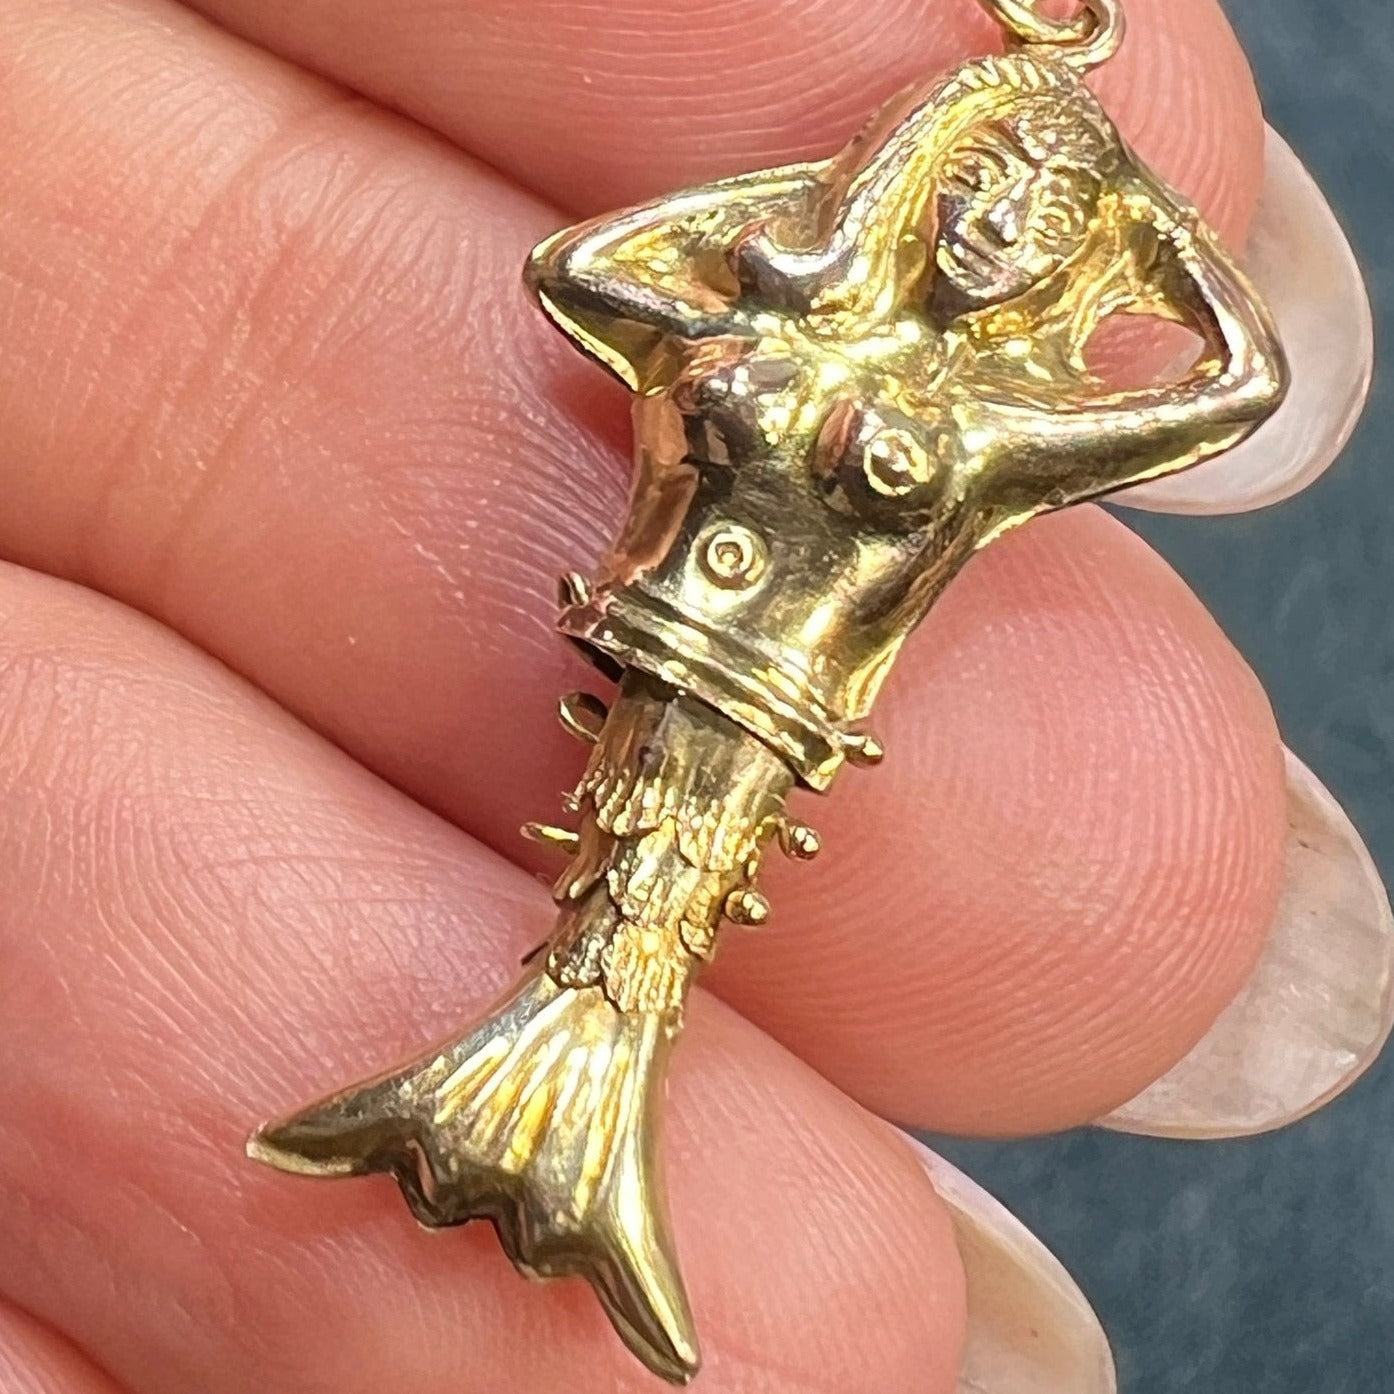 14k Gold Mermaid Pendant w Jointed Articulated Tail. 1"